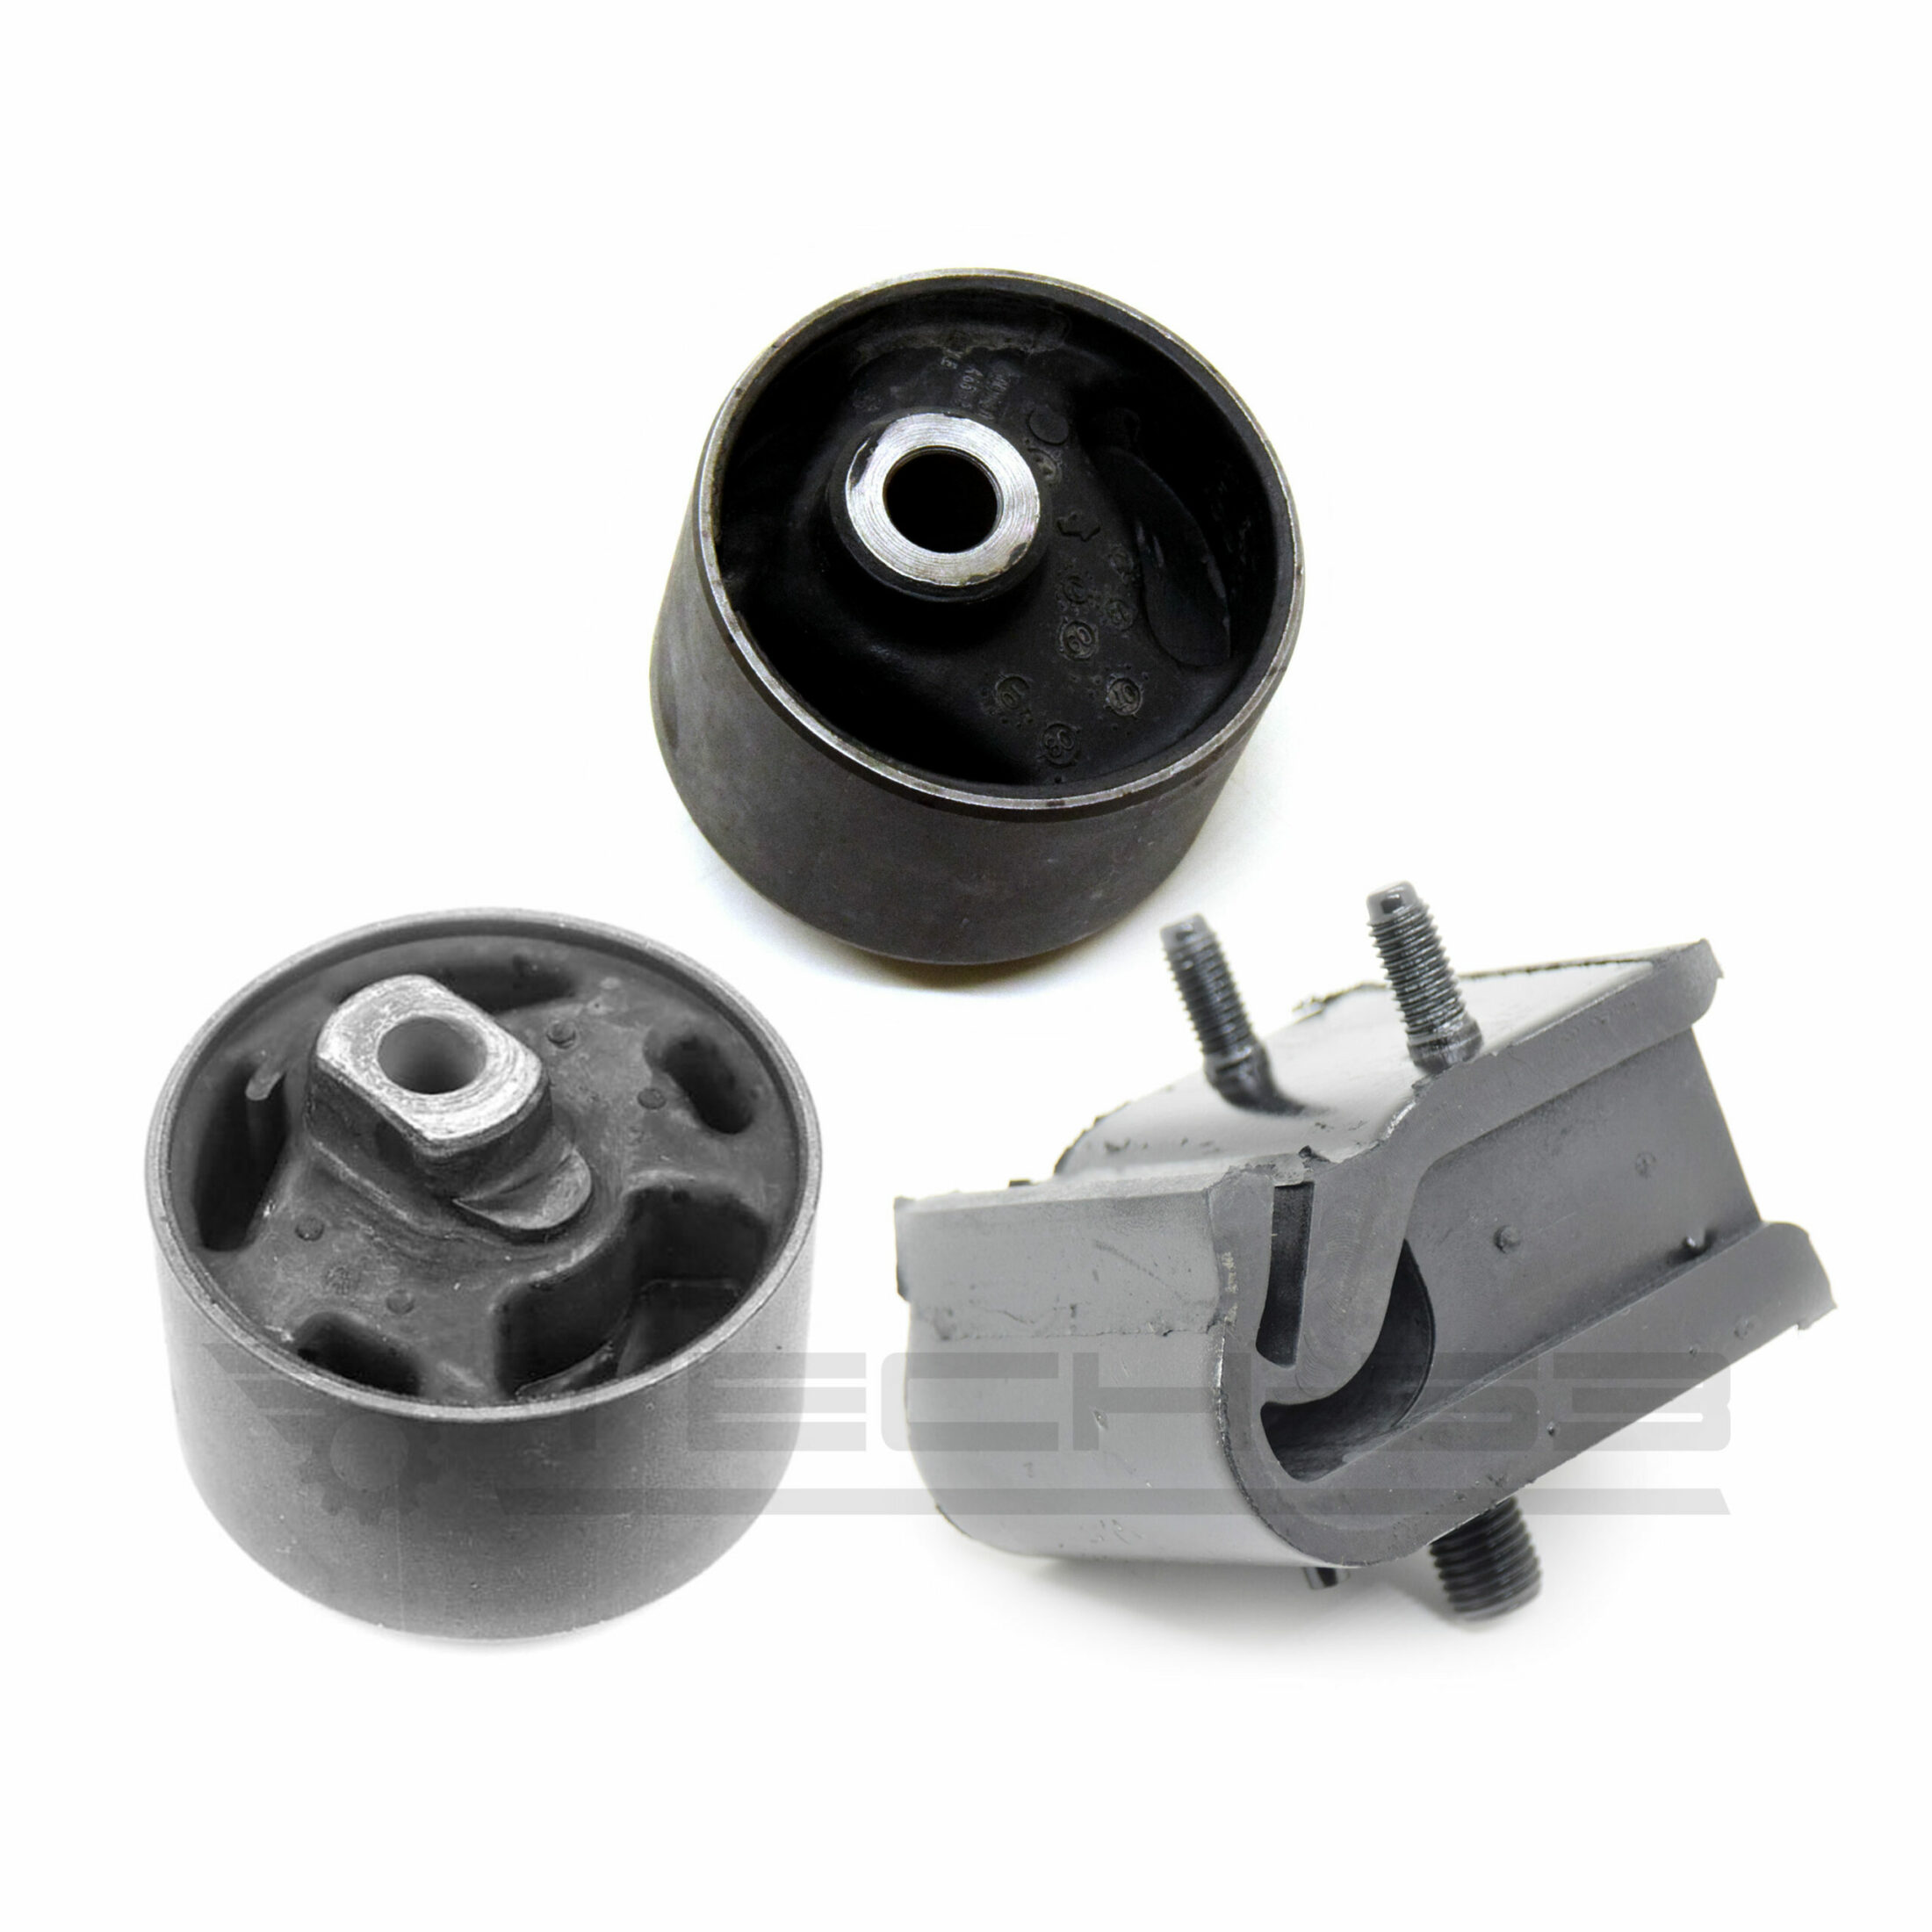 VW MK1 ENGINE MOUNT BUSHING RUBBER NEW REPLACEMENT